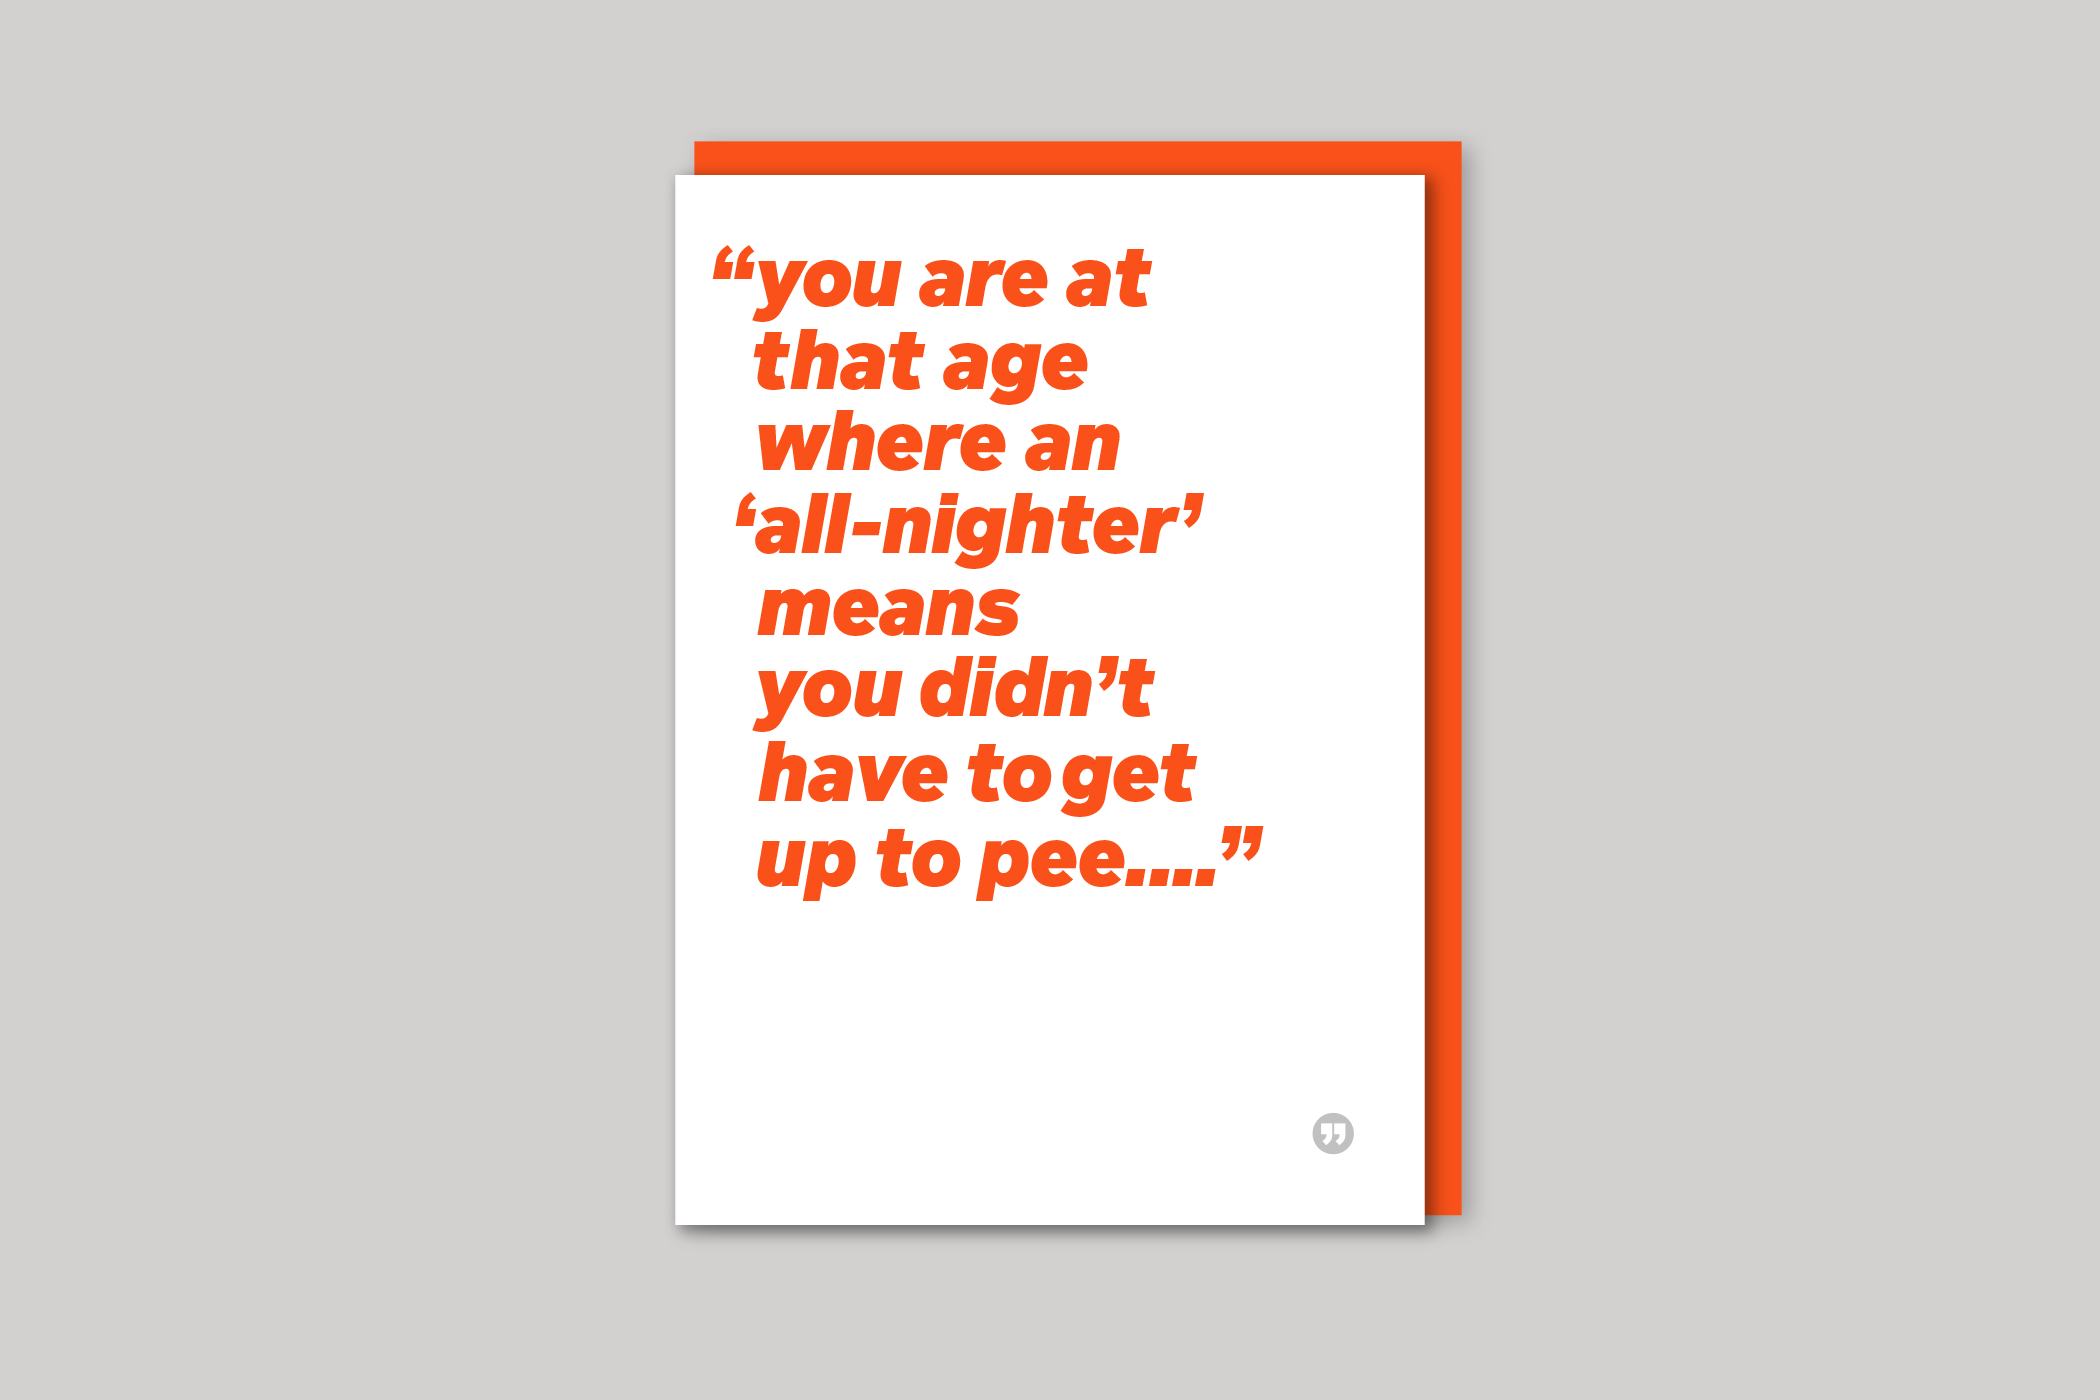 All-nighter funny quotation from Quotecards range of cards by Icon, back page.